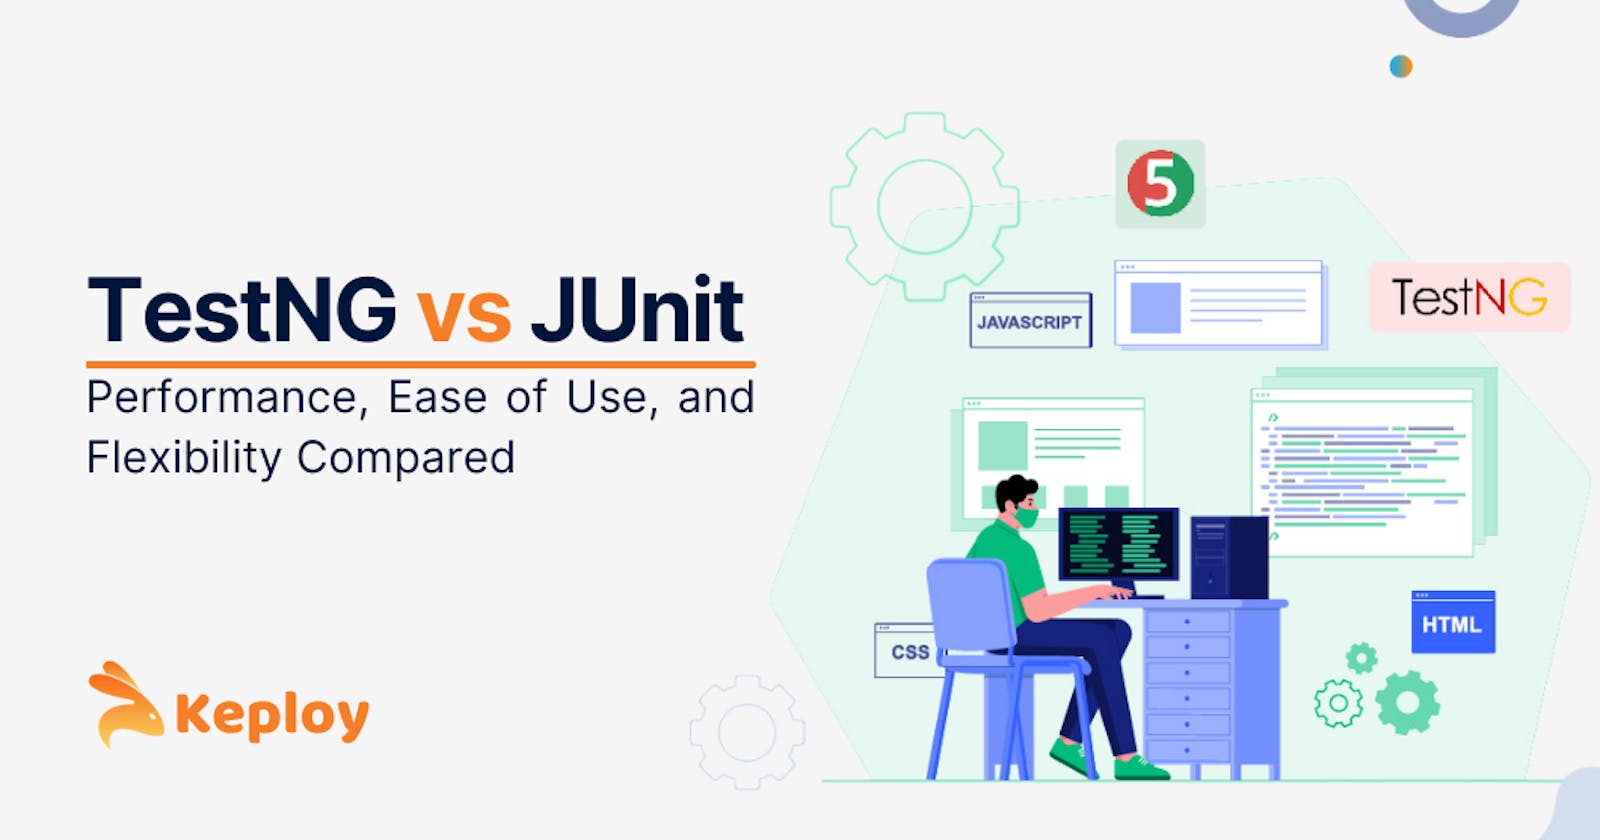 TestNG vs JUnit: Performance, Ease of Use, and Flexibility Compared